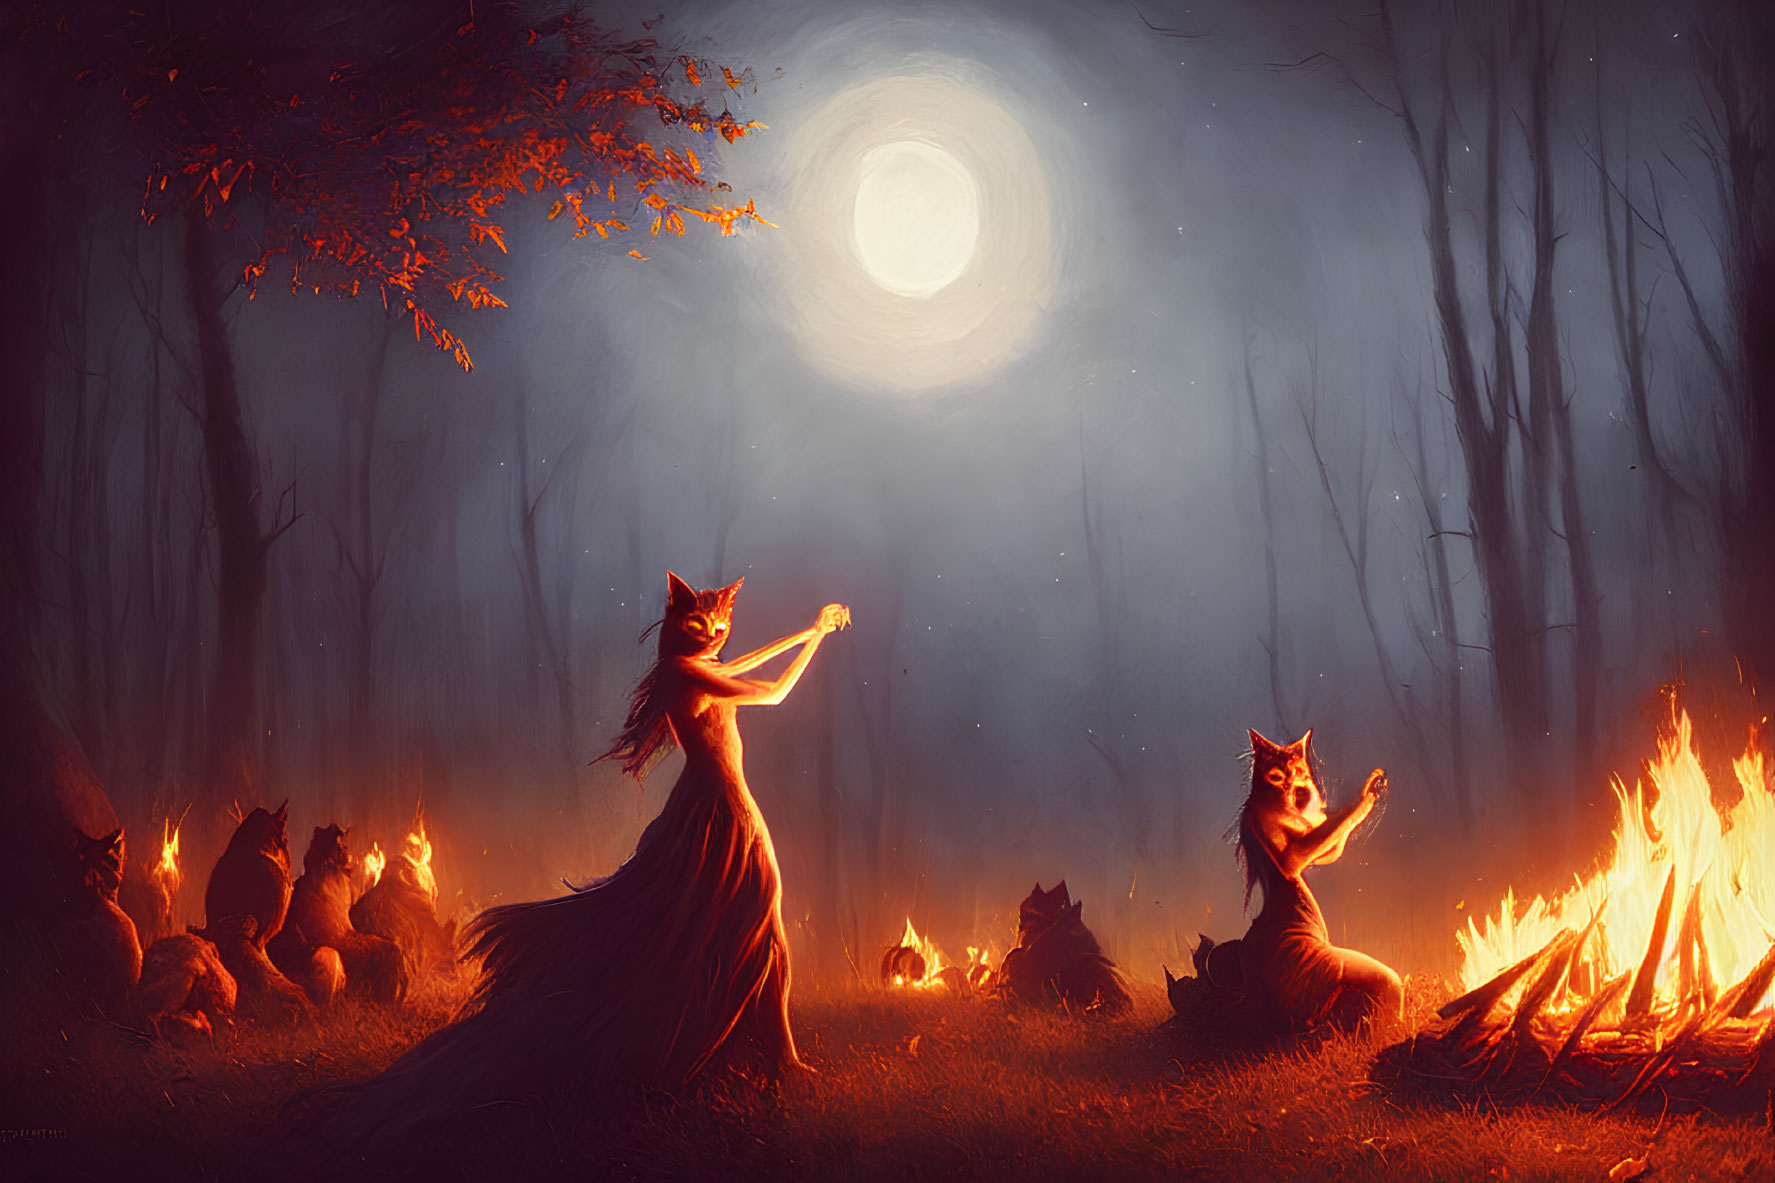 Animated fox characters with human-like features performing a ritualistic dance around fires in a mystical forest under a